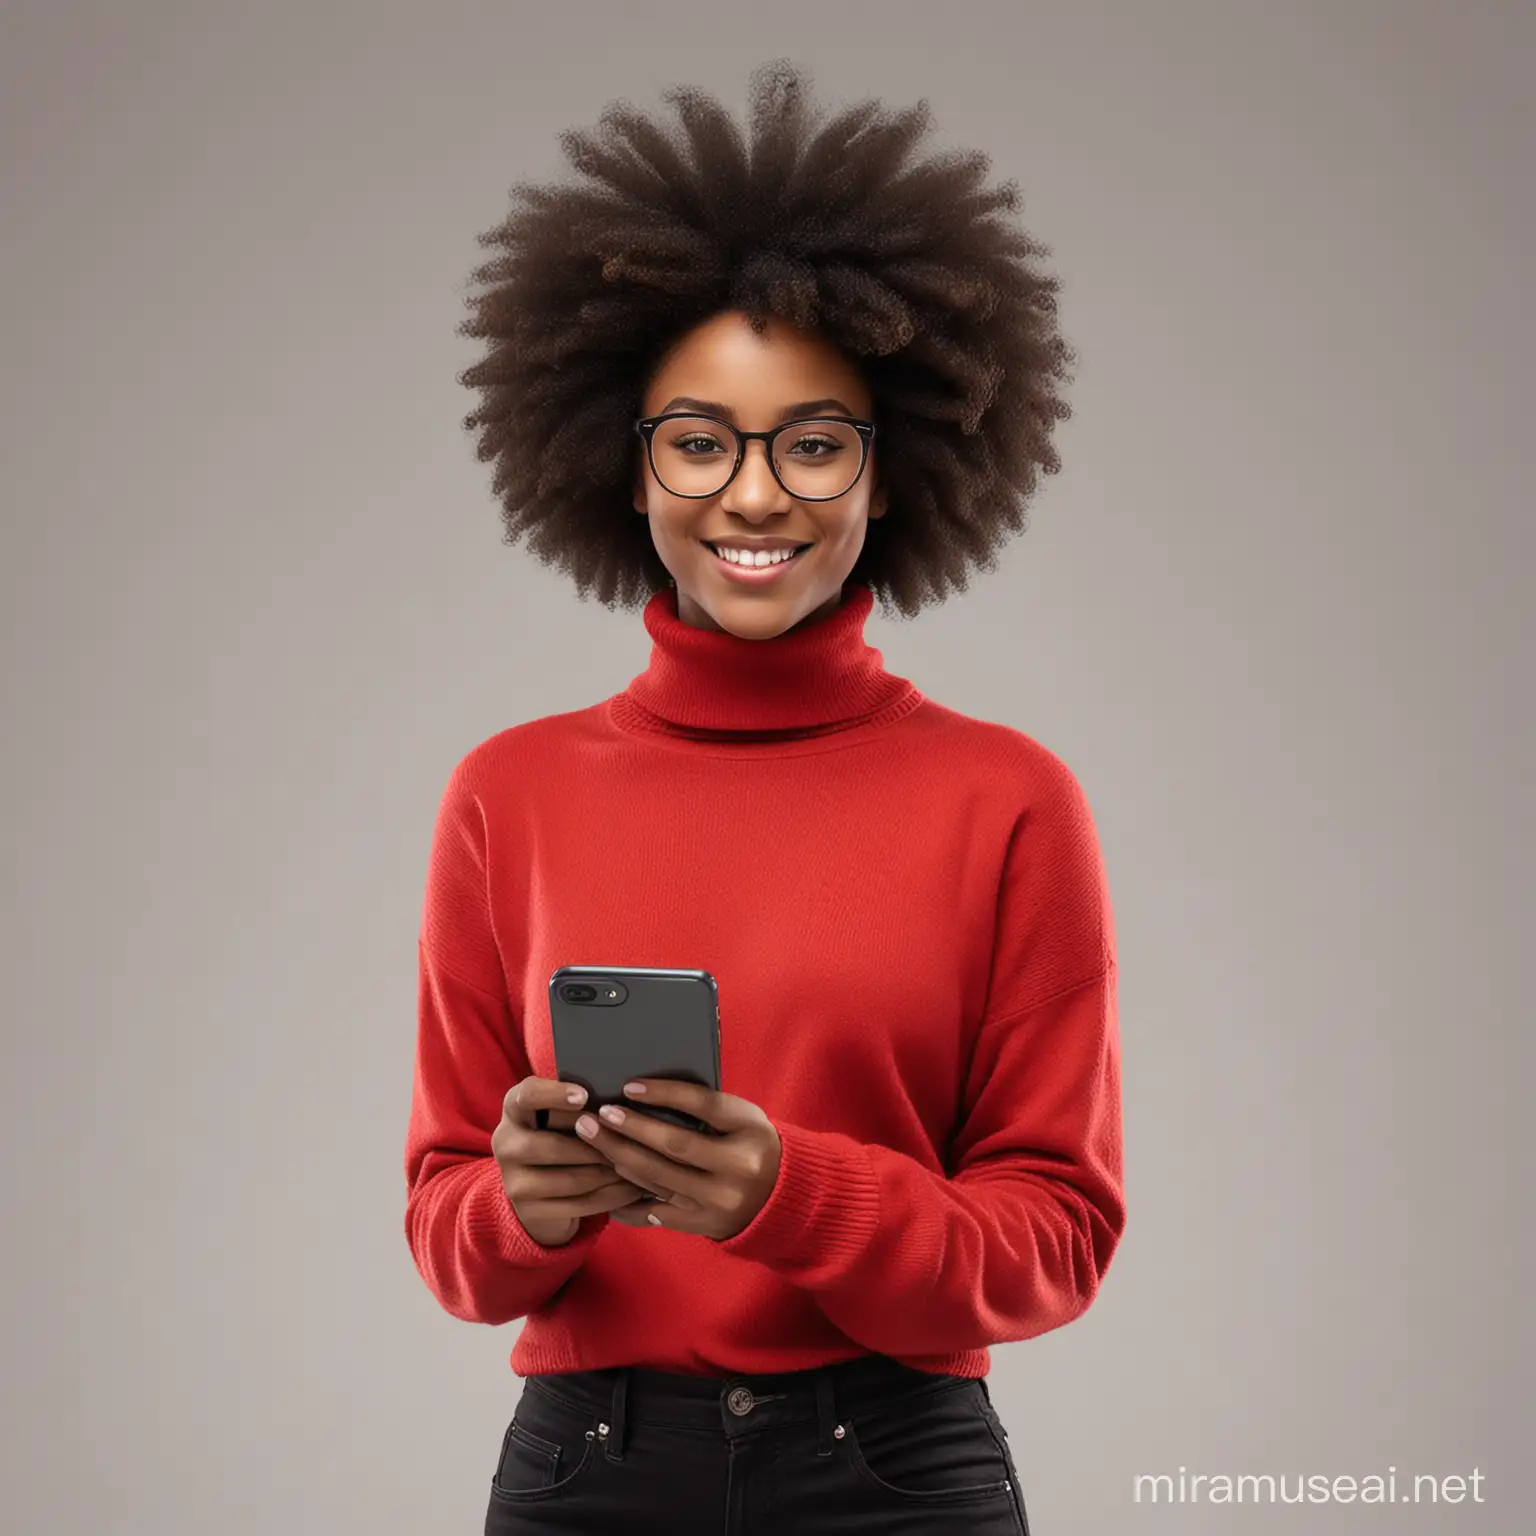 Realistic image of a beautiful 20 years old Africa dark skin lady, with stunning very short afro hair, wearing framed glasses, wearing red turtle neck sweater, with a black trousers, front facing, looking straight into the camera, with different facial expressions, character shade: white background, smiling, operating a mobile phone full body view